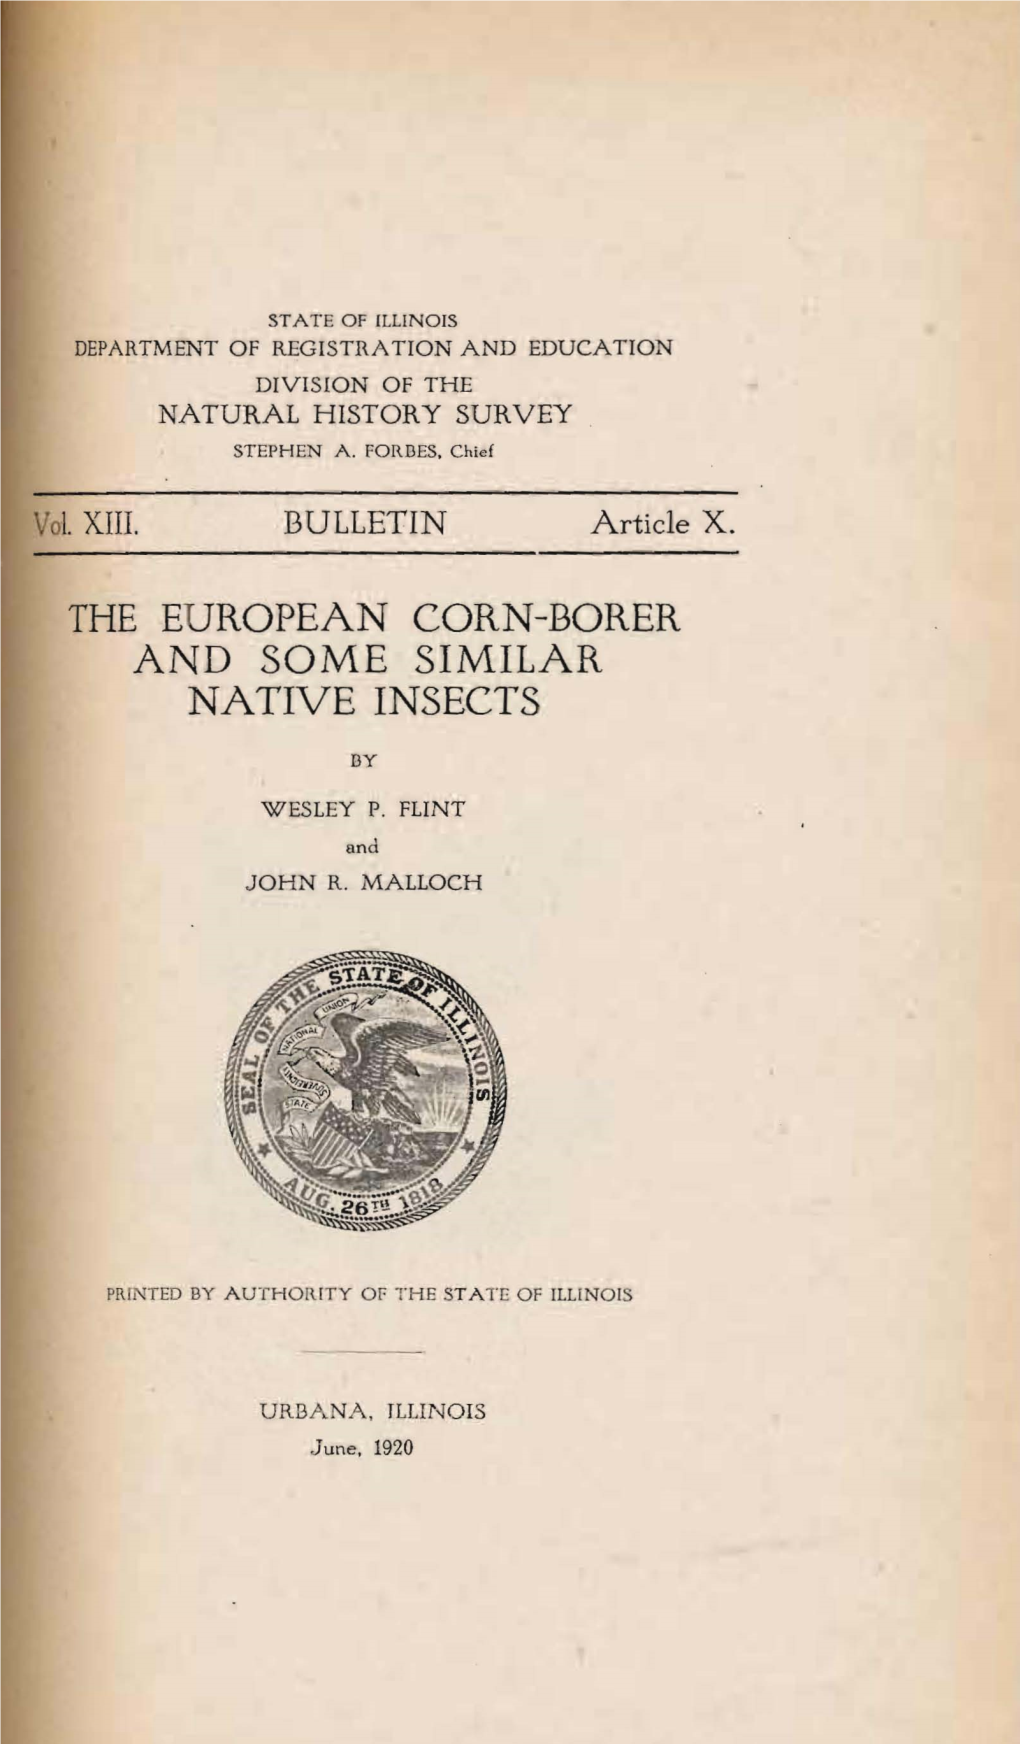 The European Corn-Borer and Some Similar Native Insects